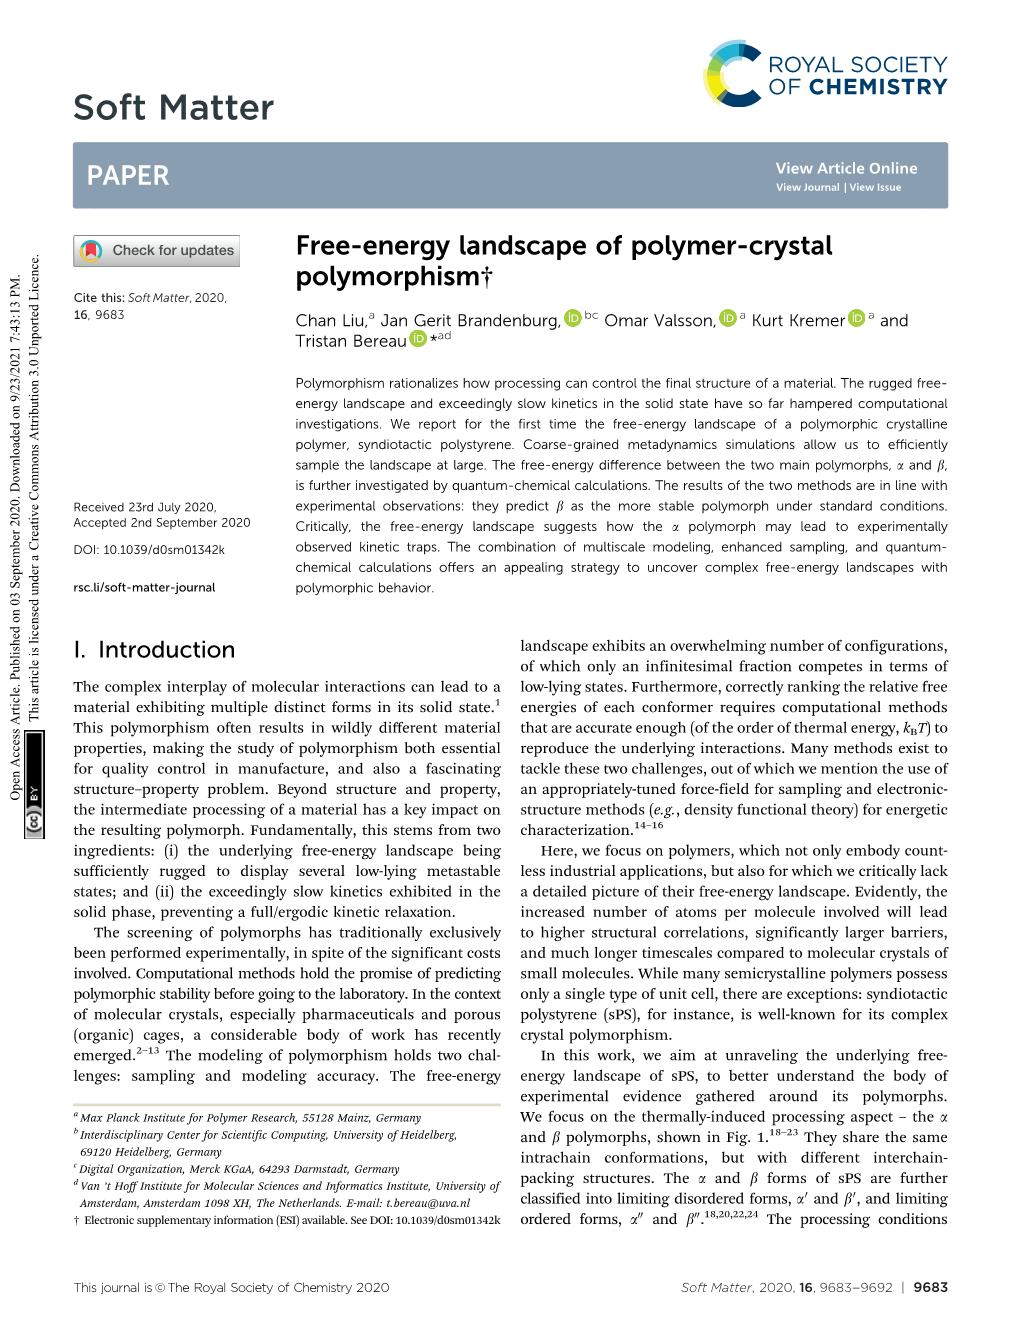 Free-Energy Landscape of Polymer-Crystal Polymorphism